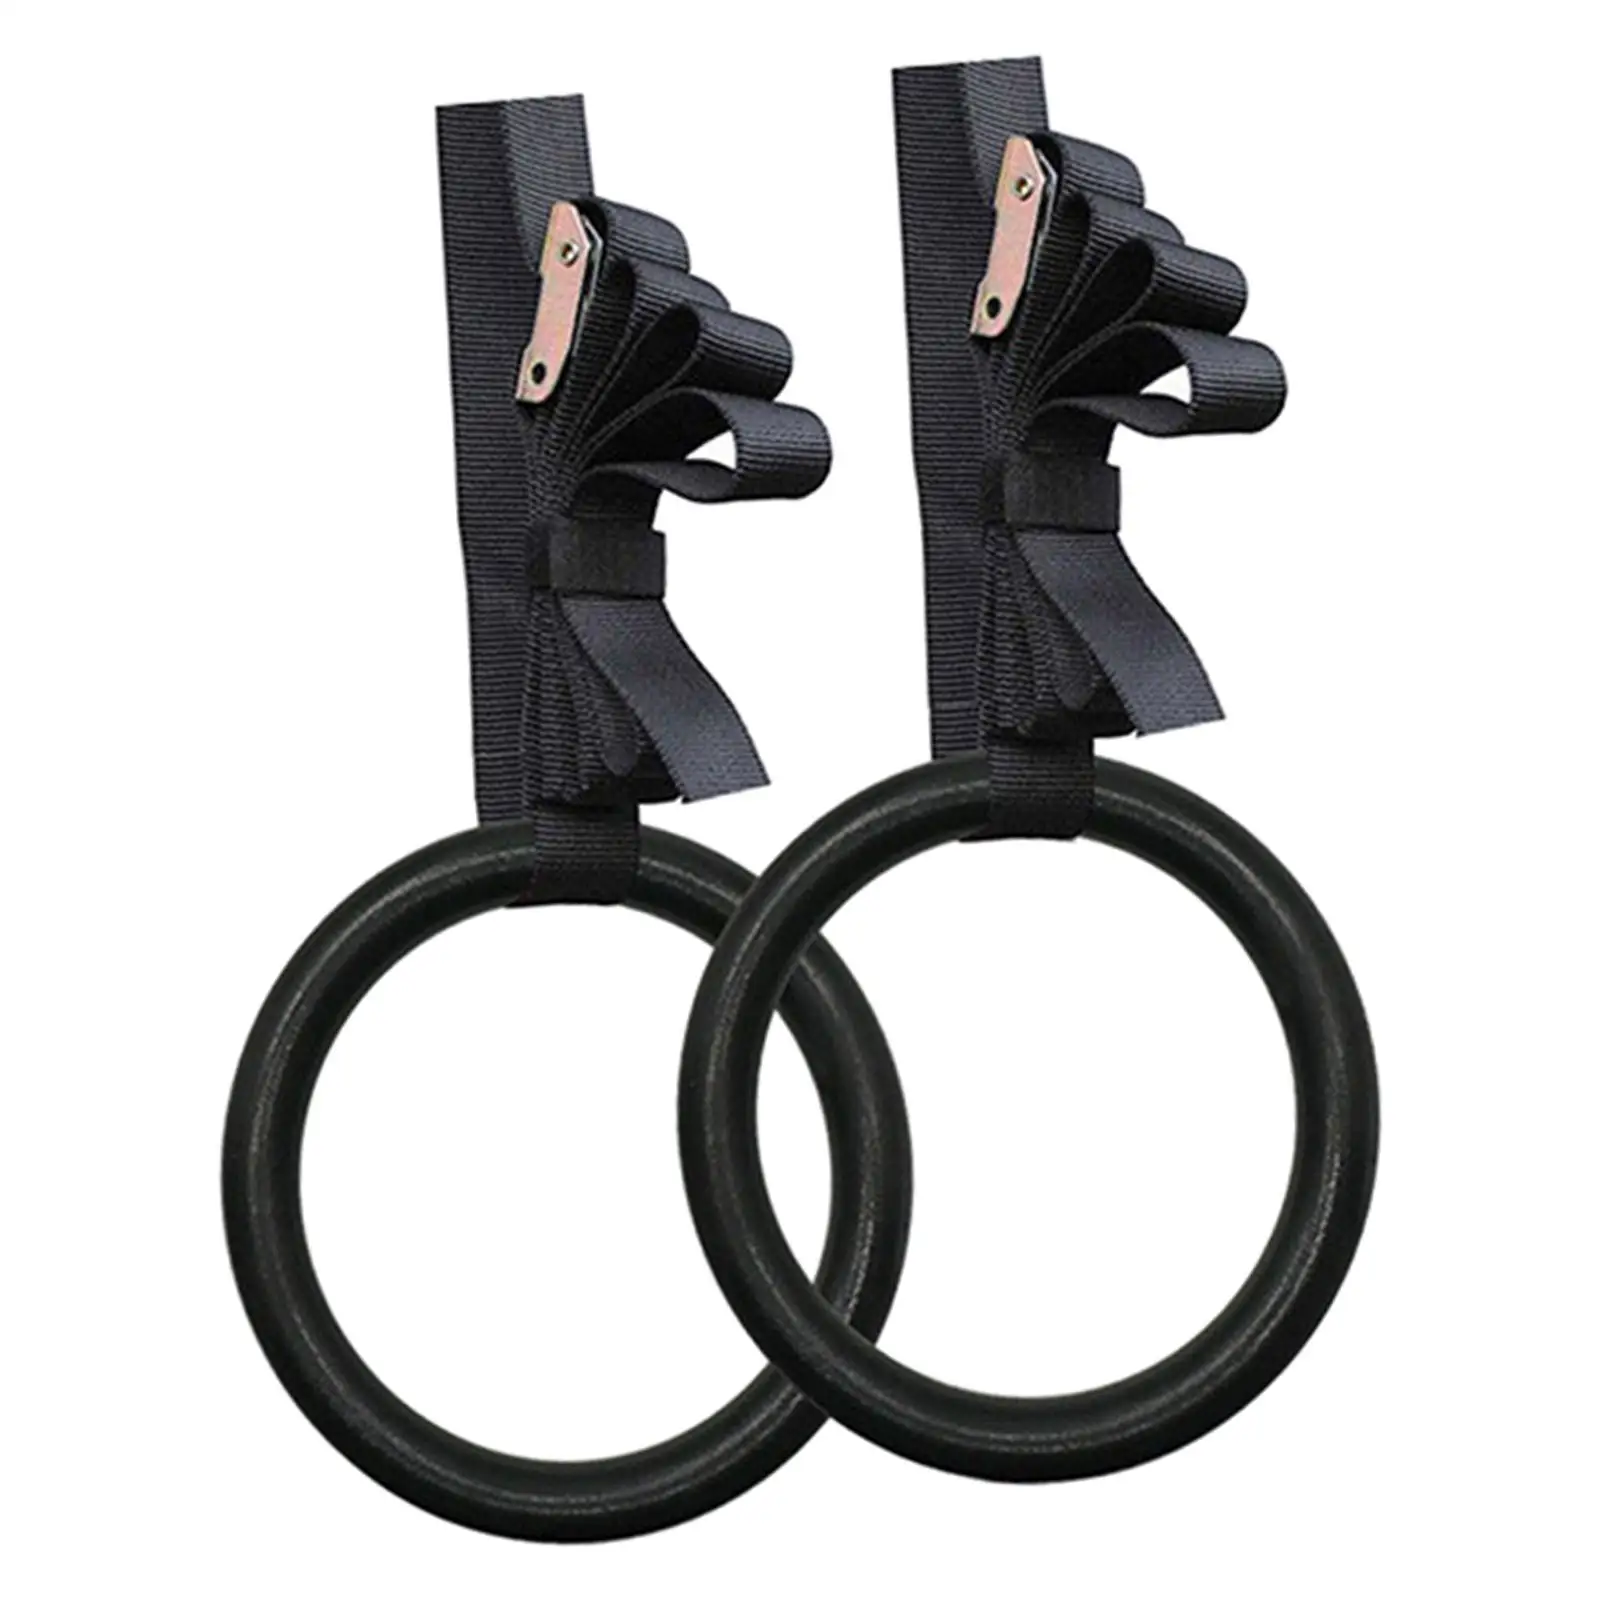 2Pcs Gymnastic Ring with Straps Trainer for Training Core Workout Pull Ups